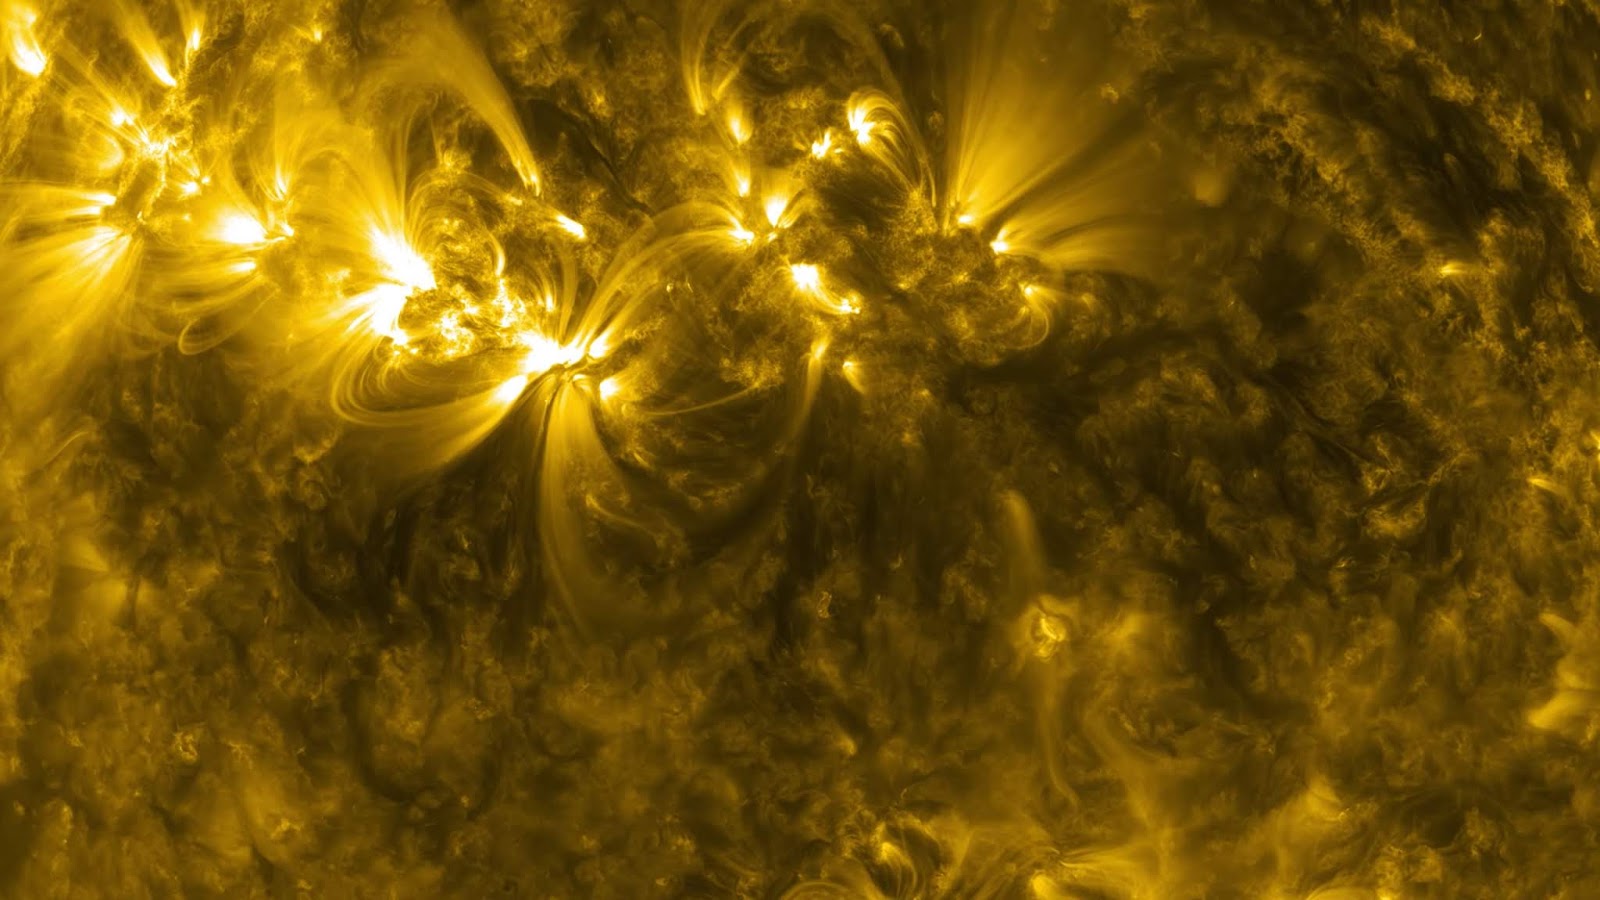 The Sun In 4k Uhd Nature Art Relaxation Nasa Video Jaw Dropping